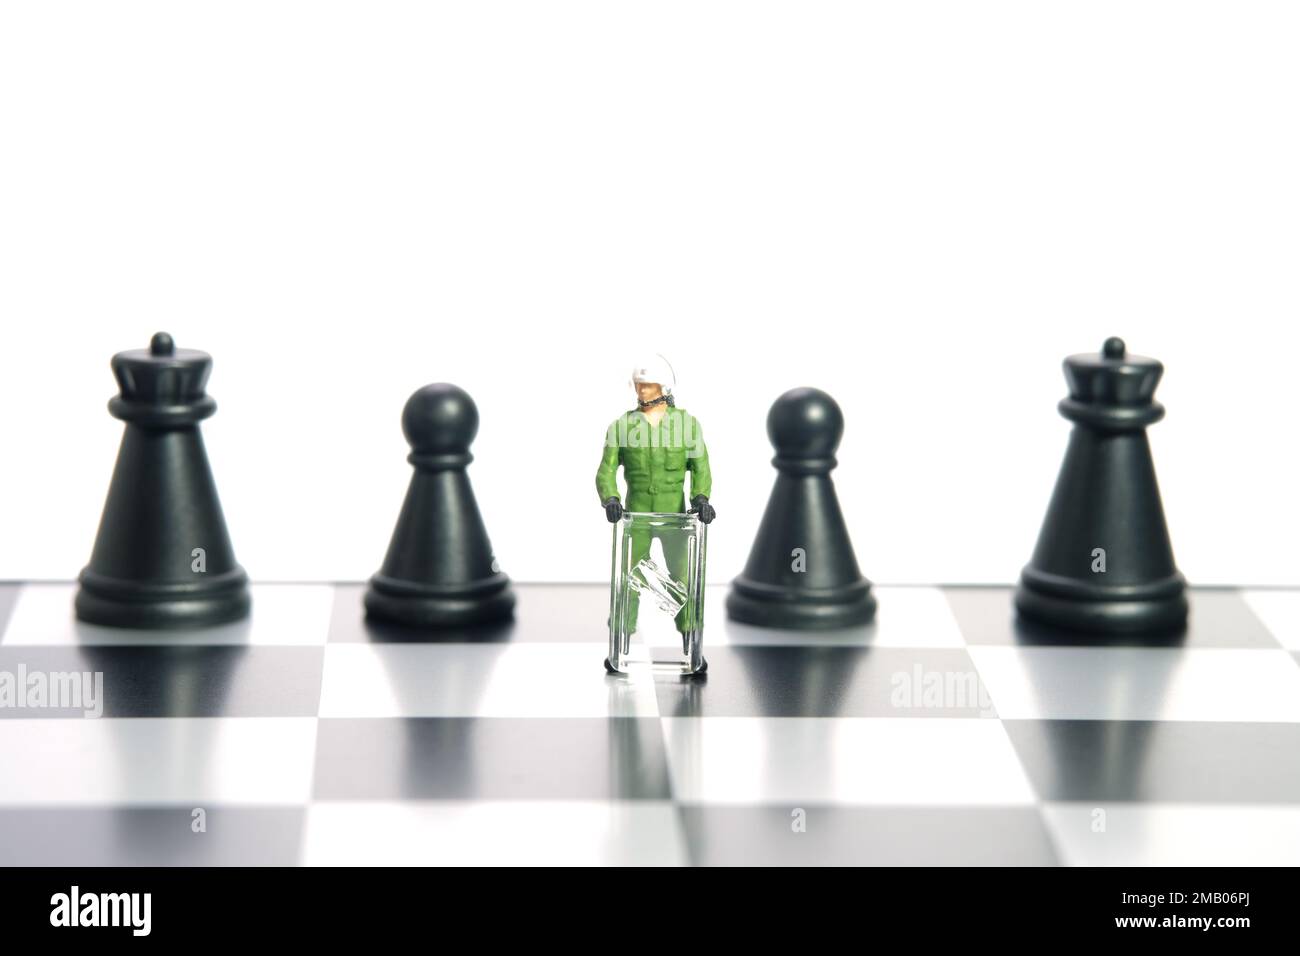 Miniature people toy figure photography. Protection strategy concept. A military anti riot armored army standing above chessboard. Isolated on white b Stock Photo